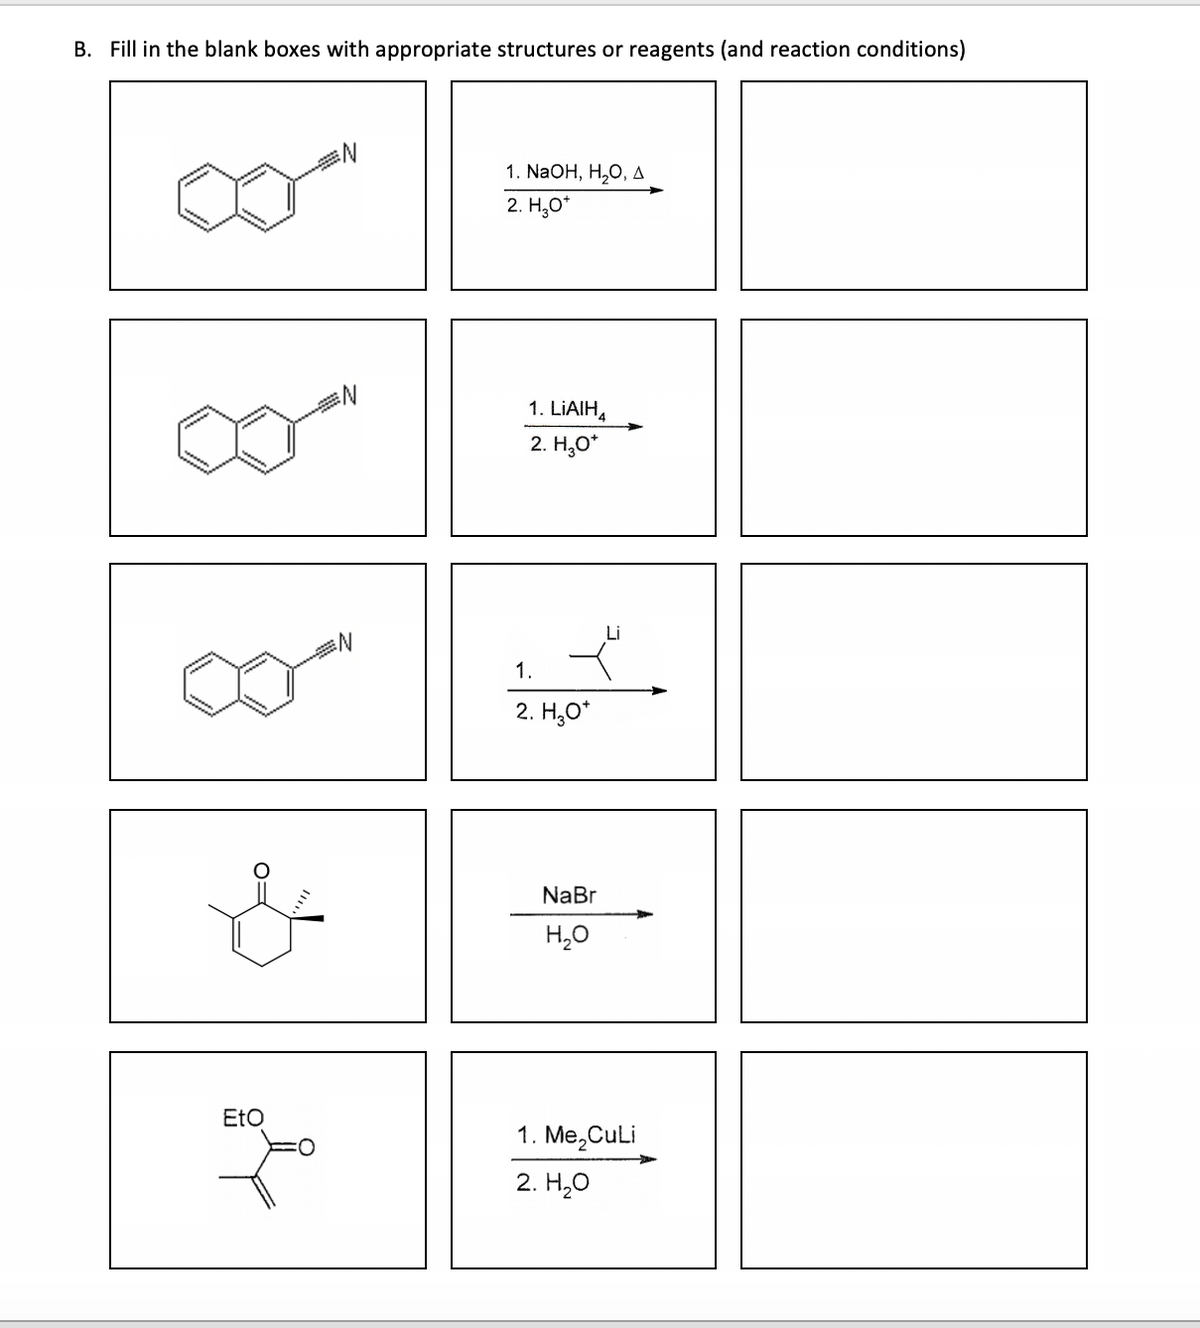 B. Fill in the blank boxes with appropriate structures or reagents (and reaction conditions)
EtO
1. NaOH, H₂O, A
2. H₂O*
1. LIAIH
2. H₂O*
1.
2. H₂O*
NaBr
H₂O
1. Me₂CuLi
2. H₂O